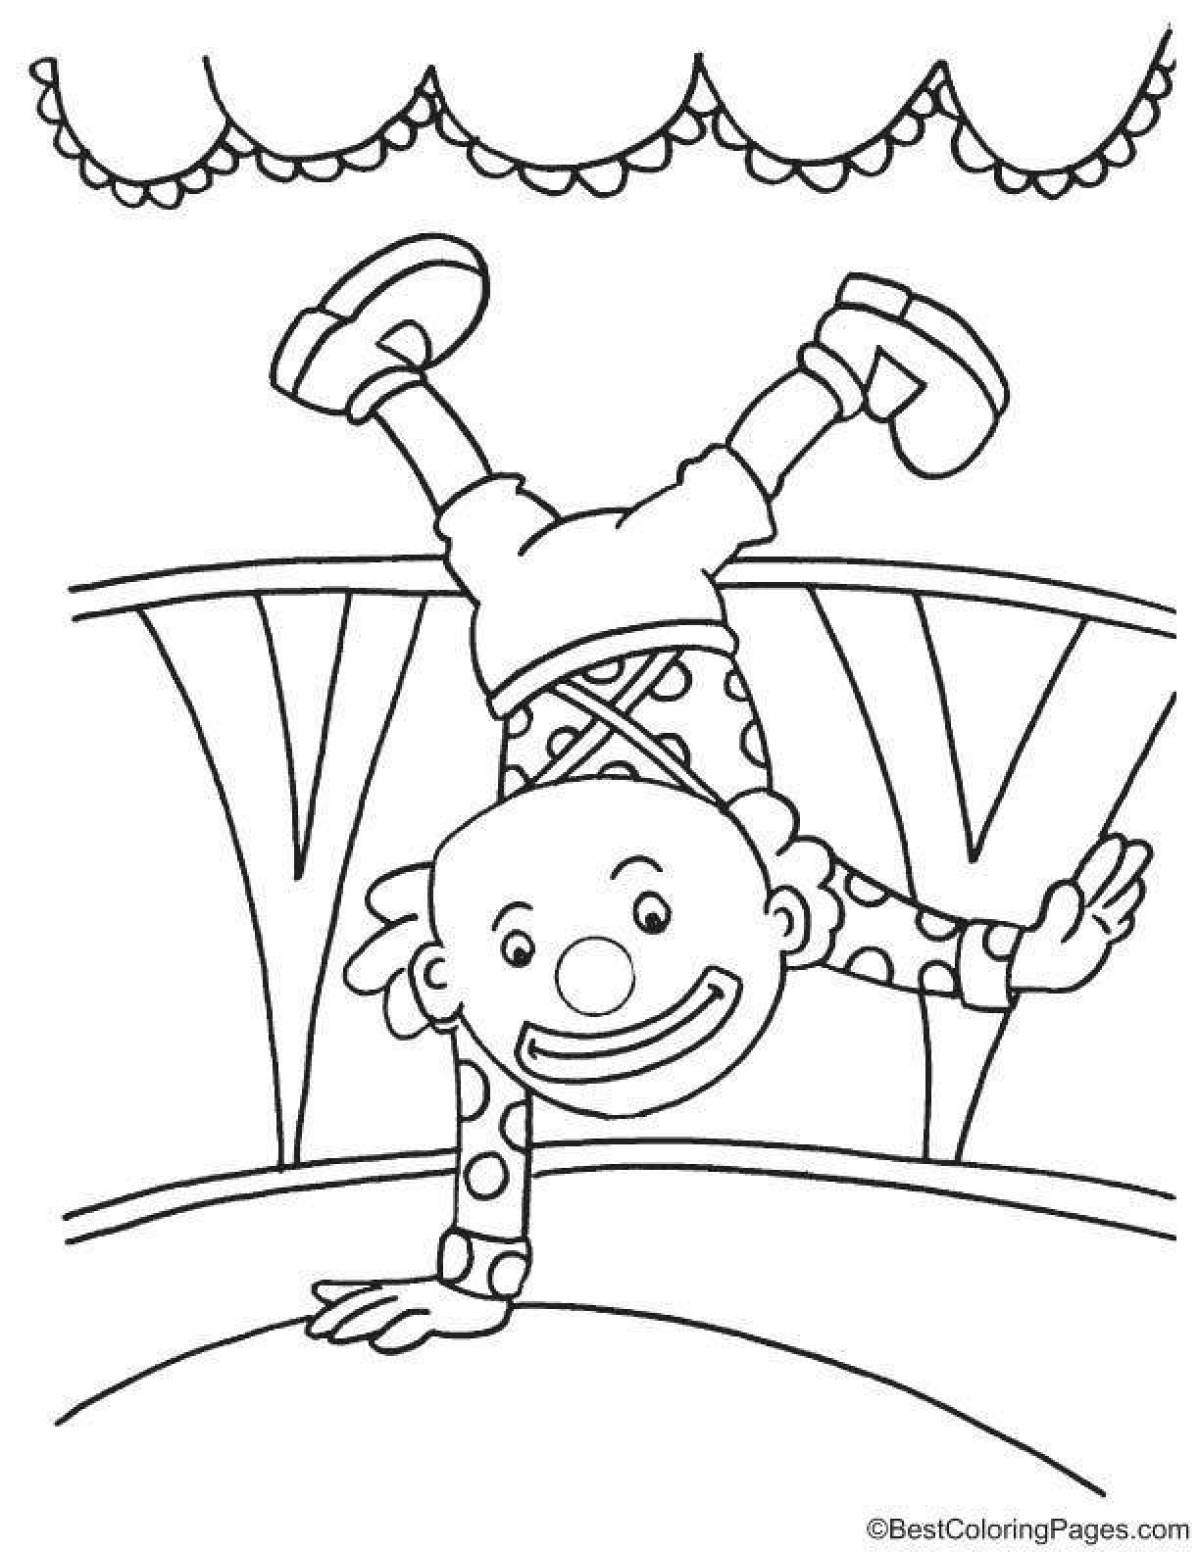 Outstanding circus coloring book